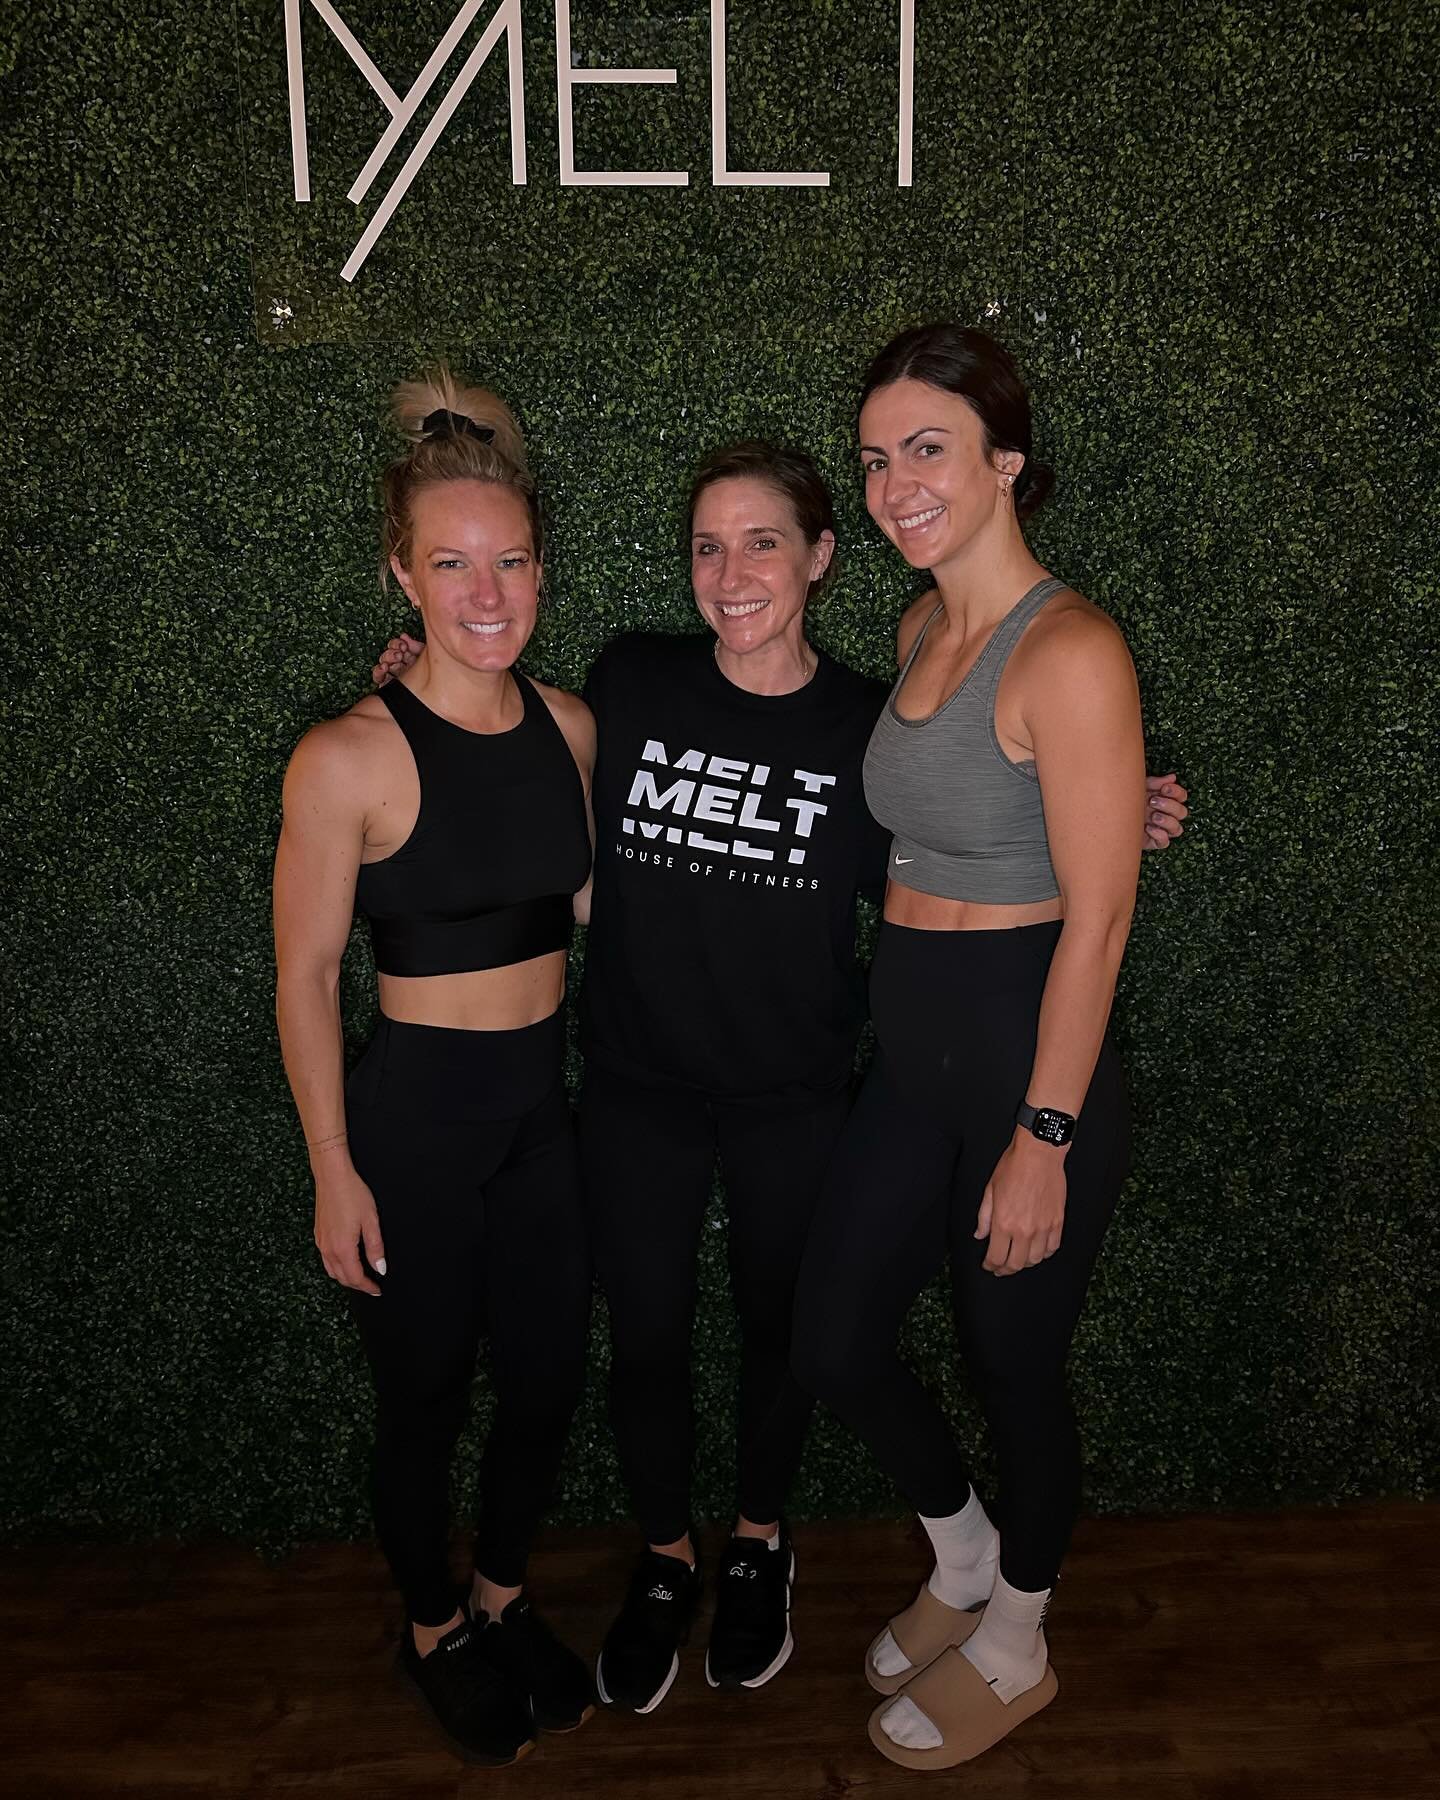 Today we celebrate all the moms balancing family and fitness, crushing workouts and inspiring us every day! You&rsquo;re amazing moms and we&rsquo;re honored to be a part of your wellness journey. Happy Mother&rsquo;s Day! 🫶